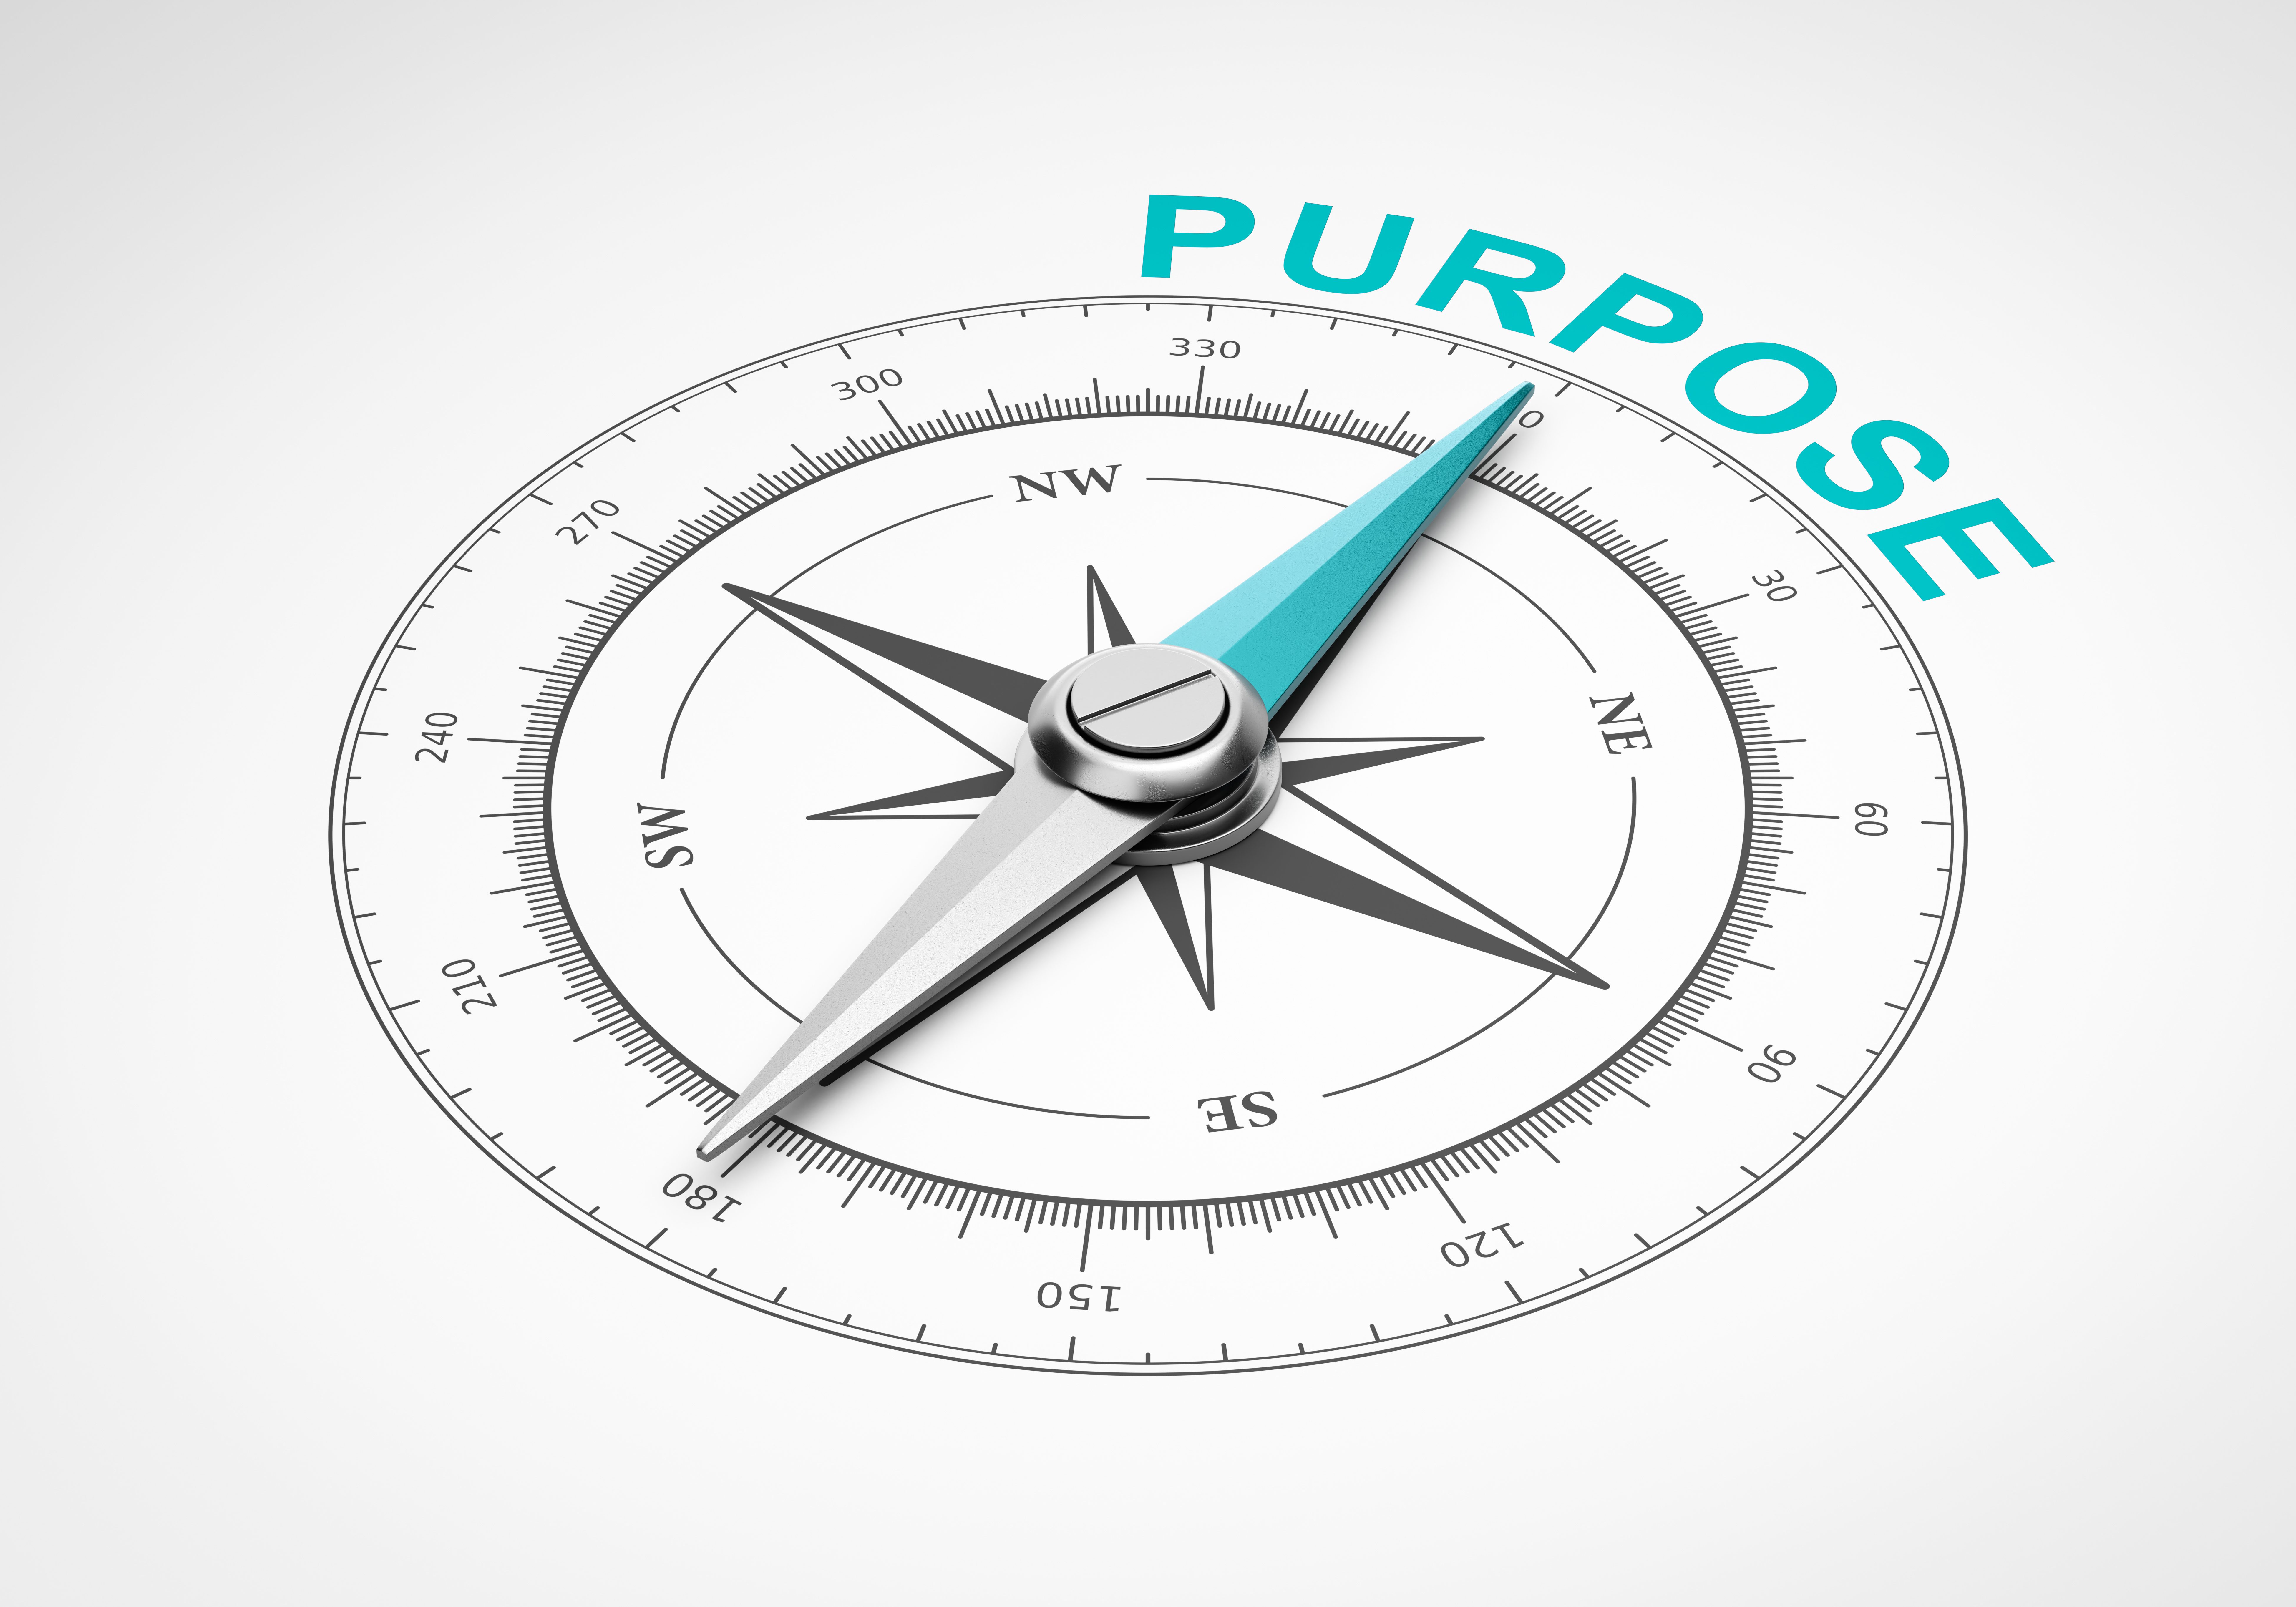 Discovering our Purpose